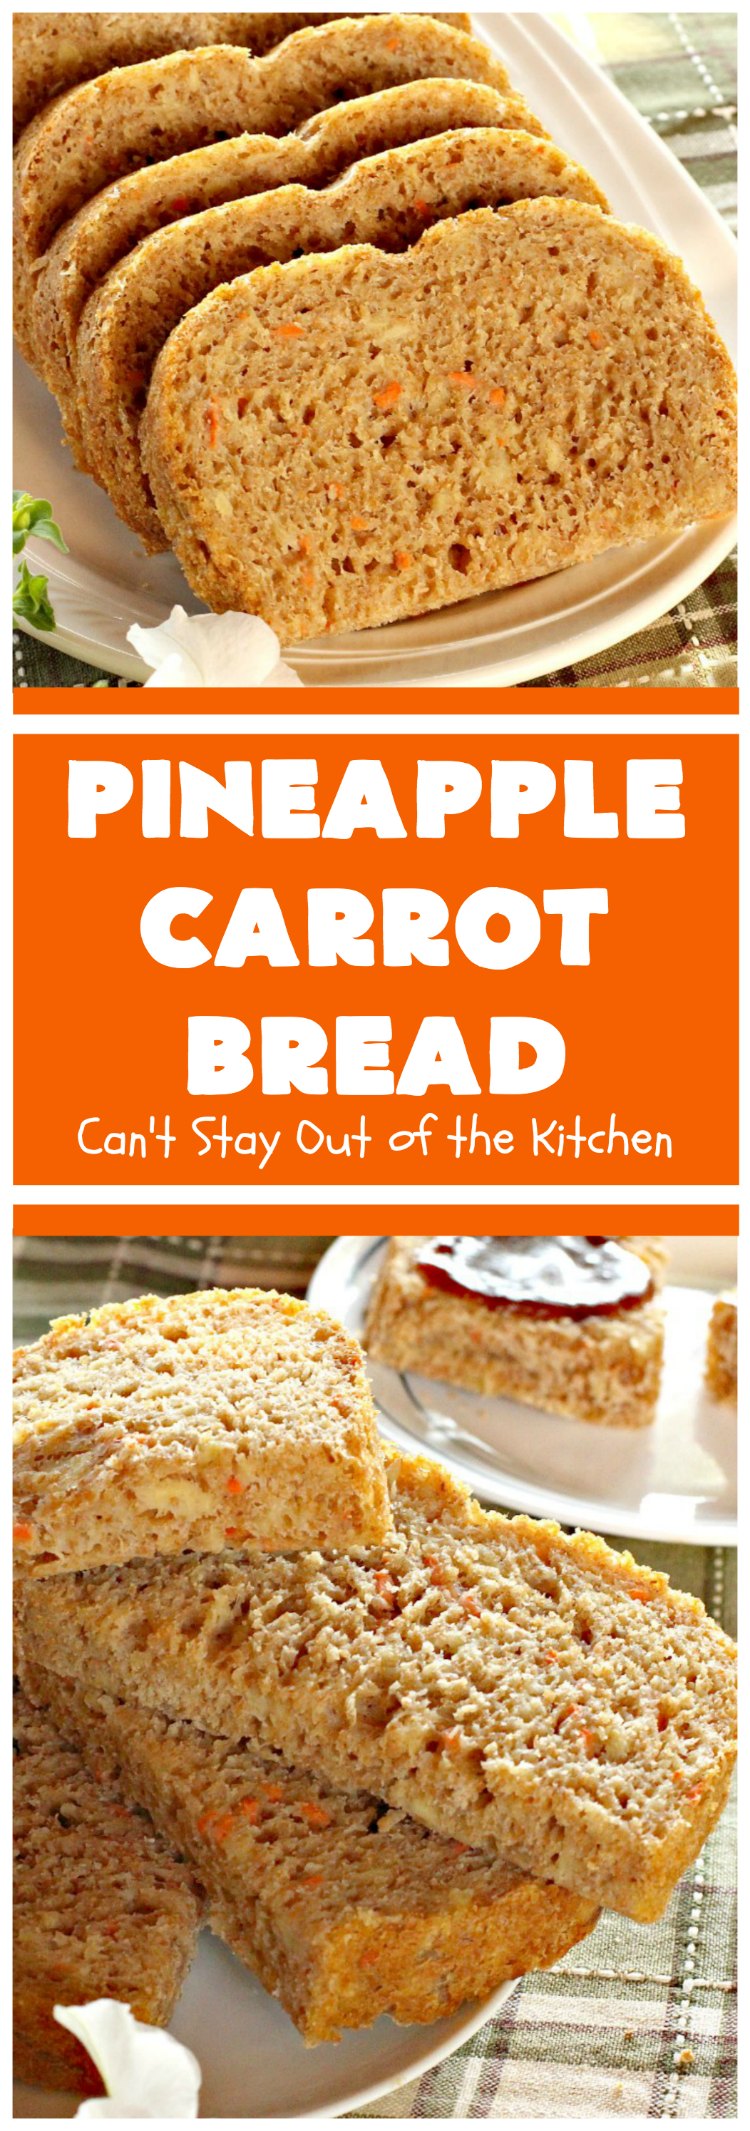 Pineapple Carrot Bread | Can't Stay Out of the Kitchen | this delicious home-baked #bread is almost like eating #CarrotCake but in bread form. It's not as sweet, but it sure is a delicious an easy bread that's made in the #breadmaker. Wonderful as a dinner bread or to serve for #breakfast. #pineapple #carrots #PineappleCarrotBread